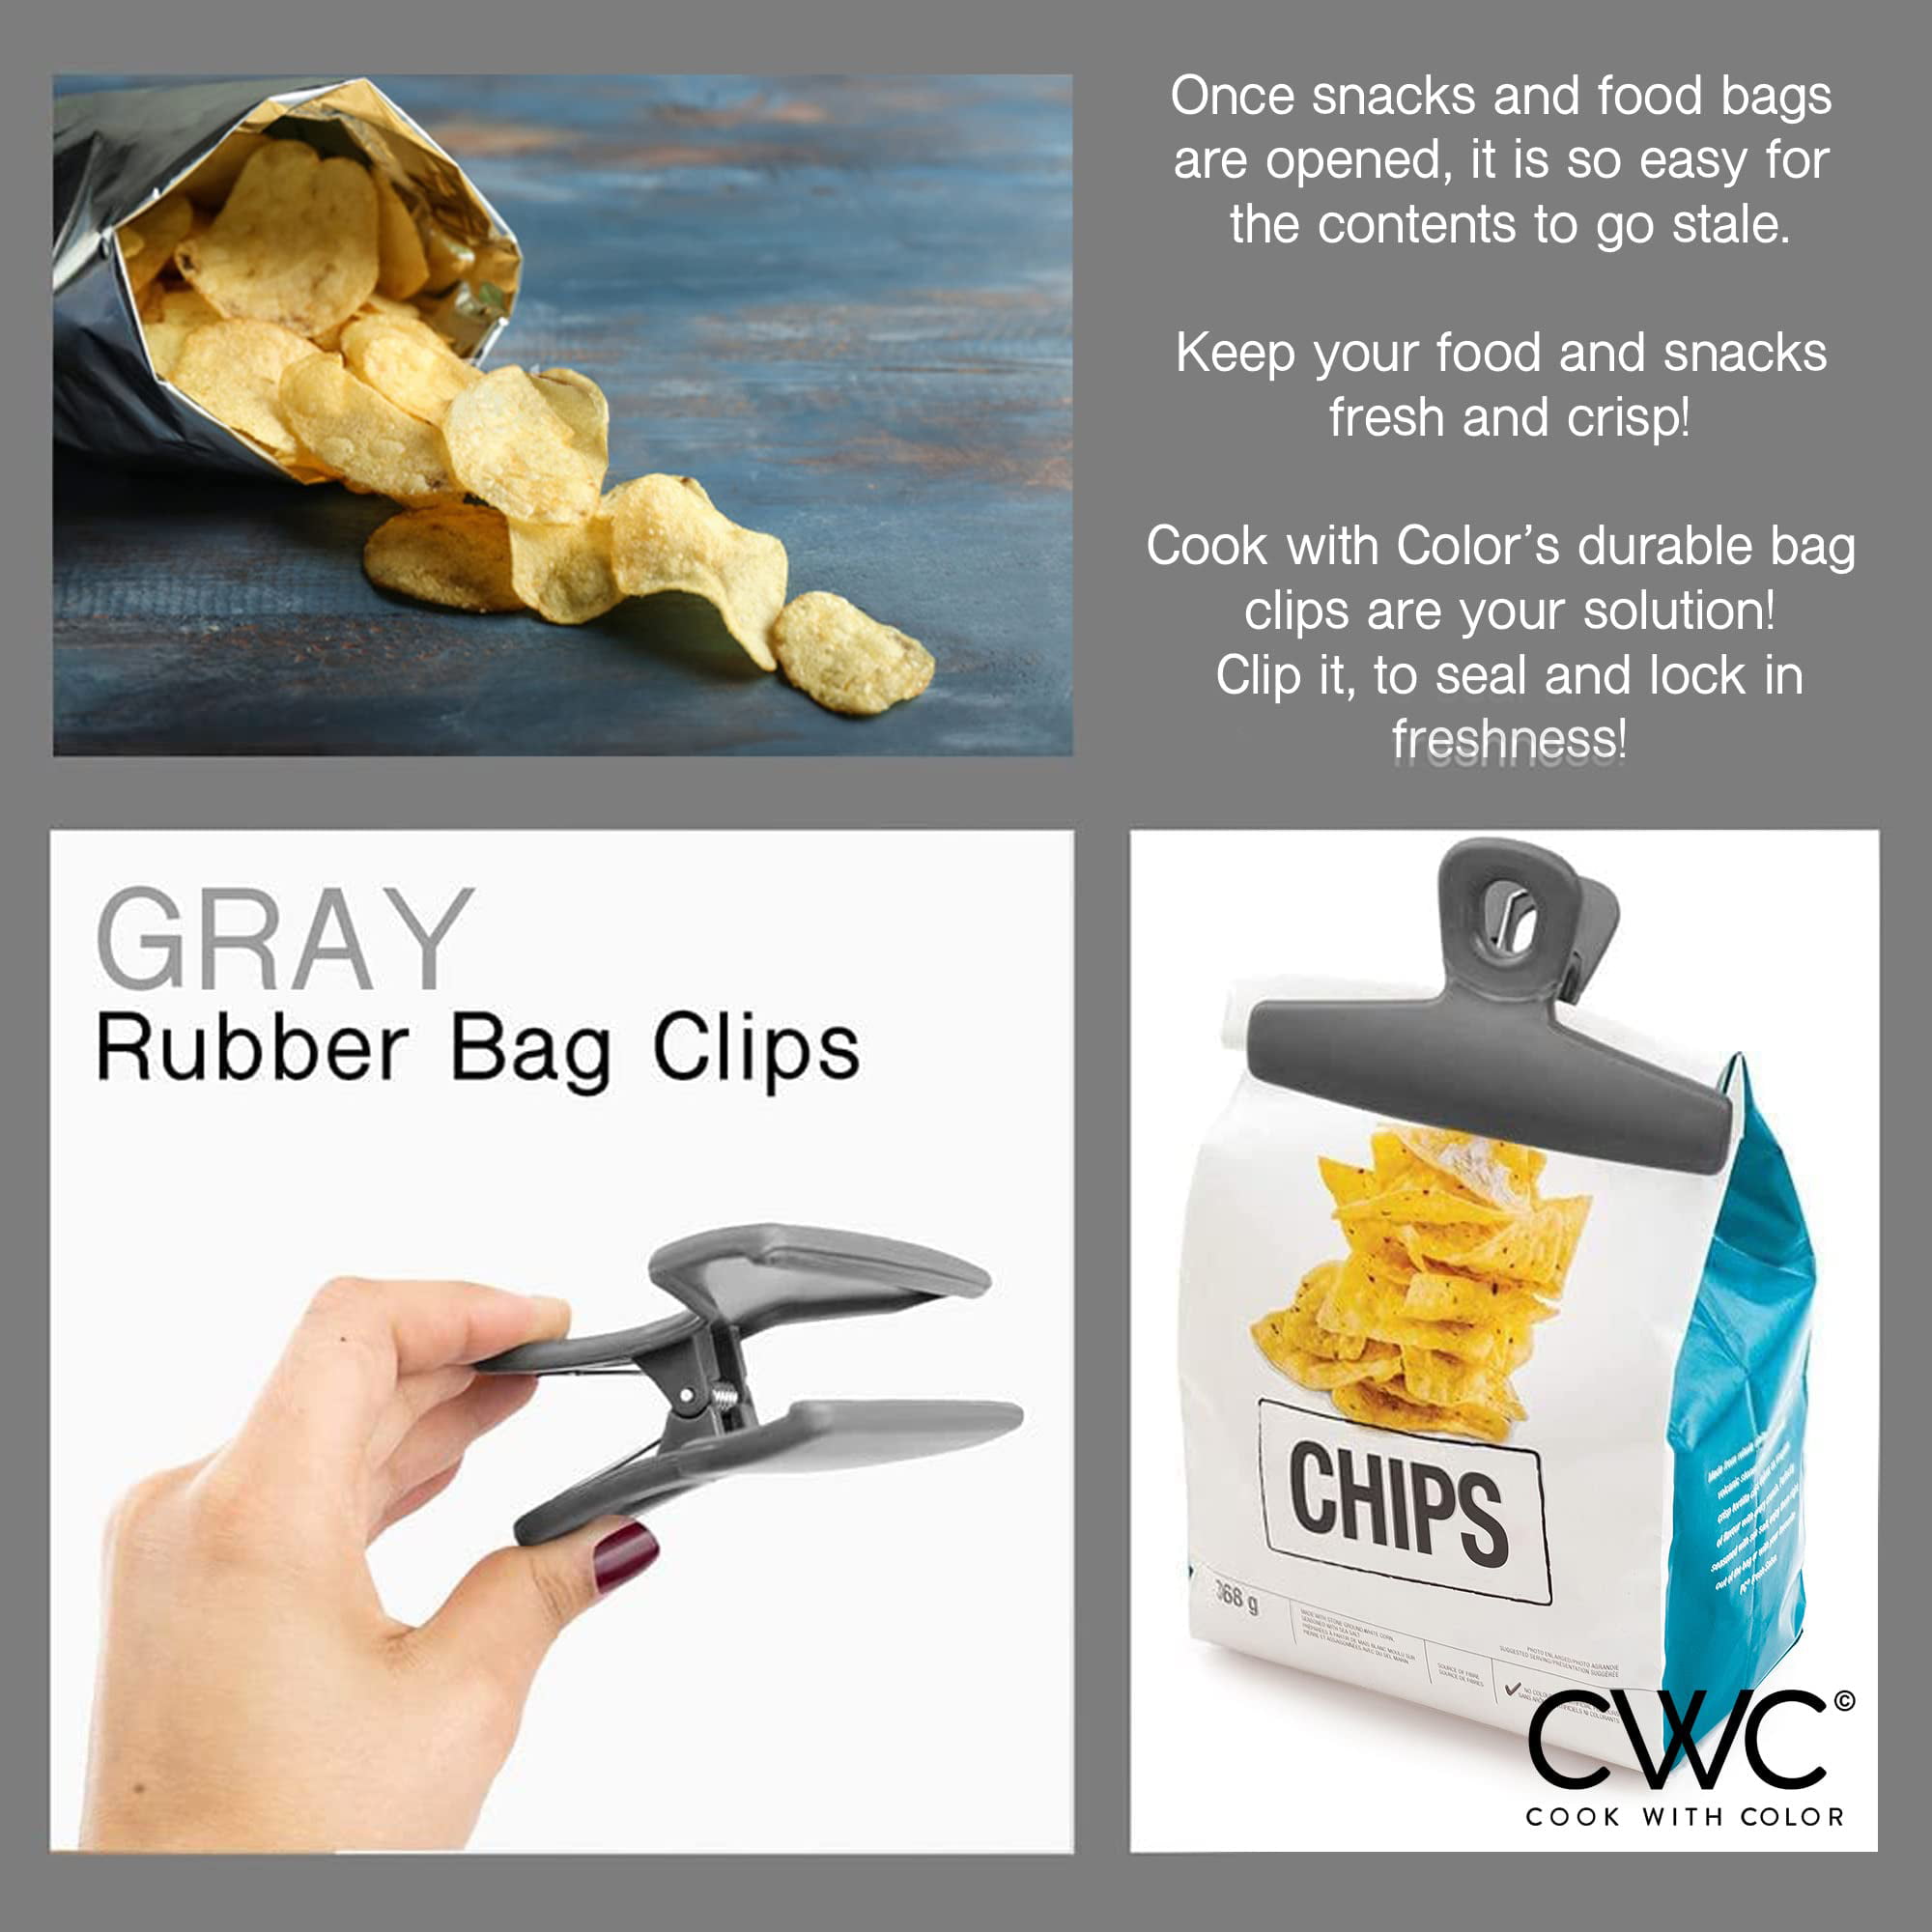 Pack of 8 Shiny Gold Bag Clips, Stainless Steel and Heavy Duty Metal Bag  Clip,Tightly Seals Chip, Coffee, Bread or Cereal Bags to Keep Food Fresh,  for